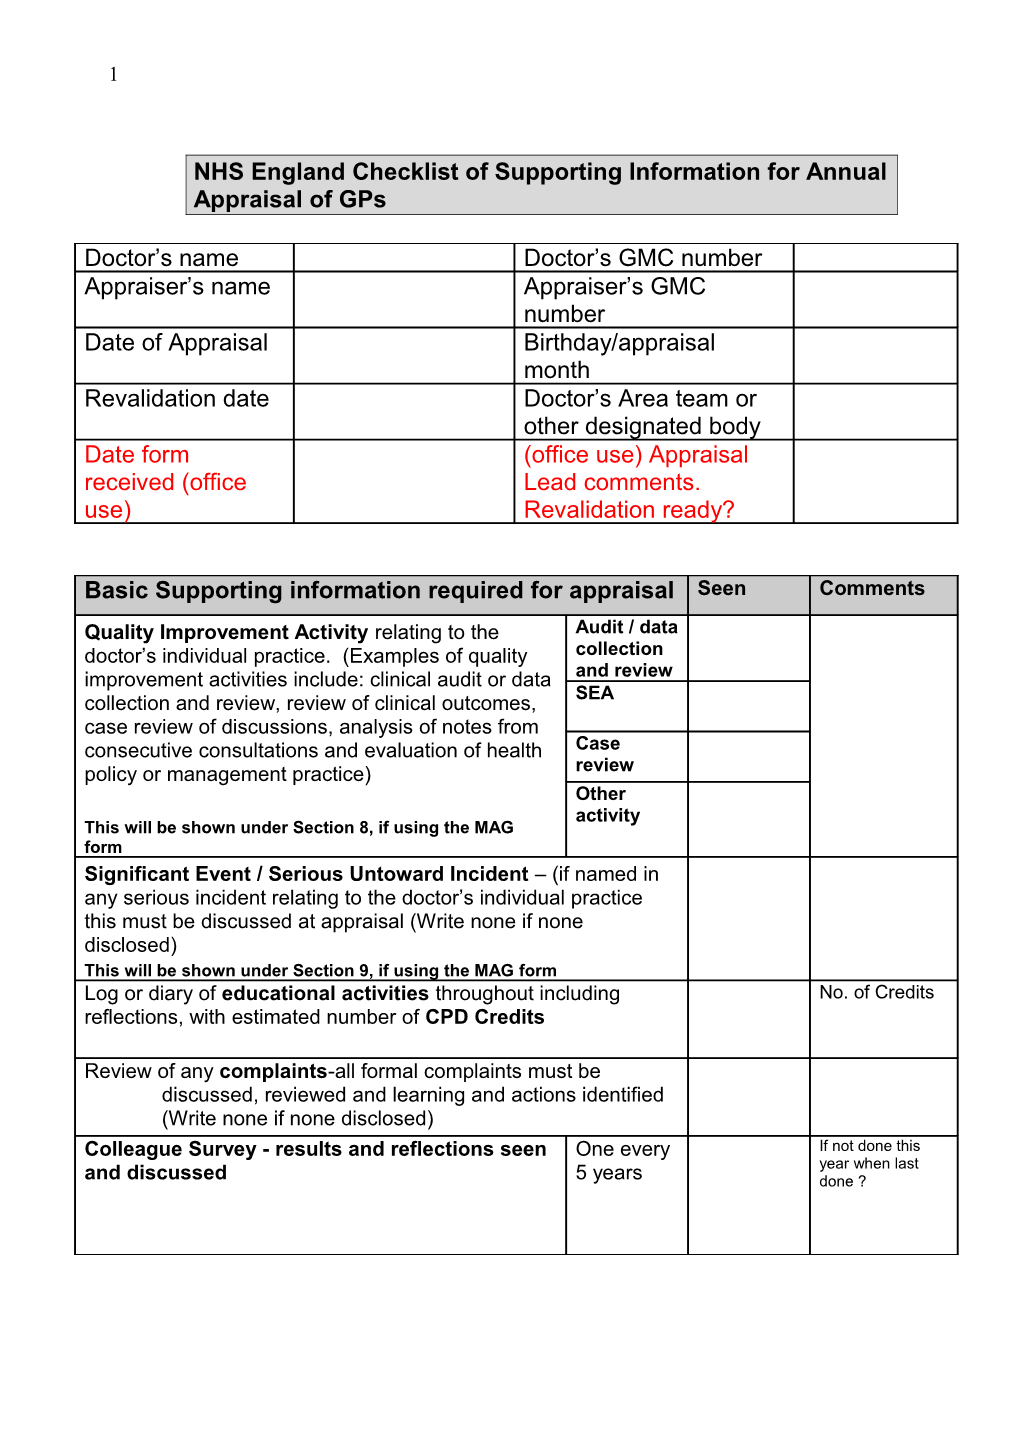 Supporting Information for Annual Appraisal - Checklist